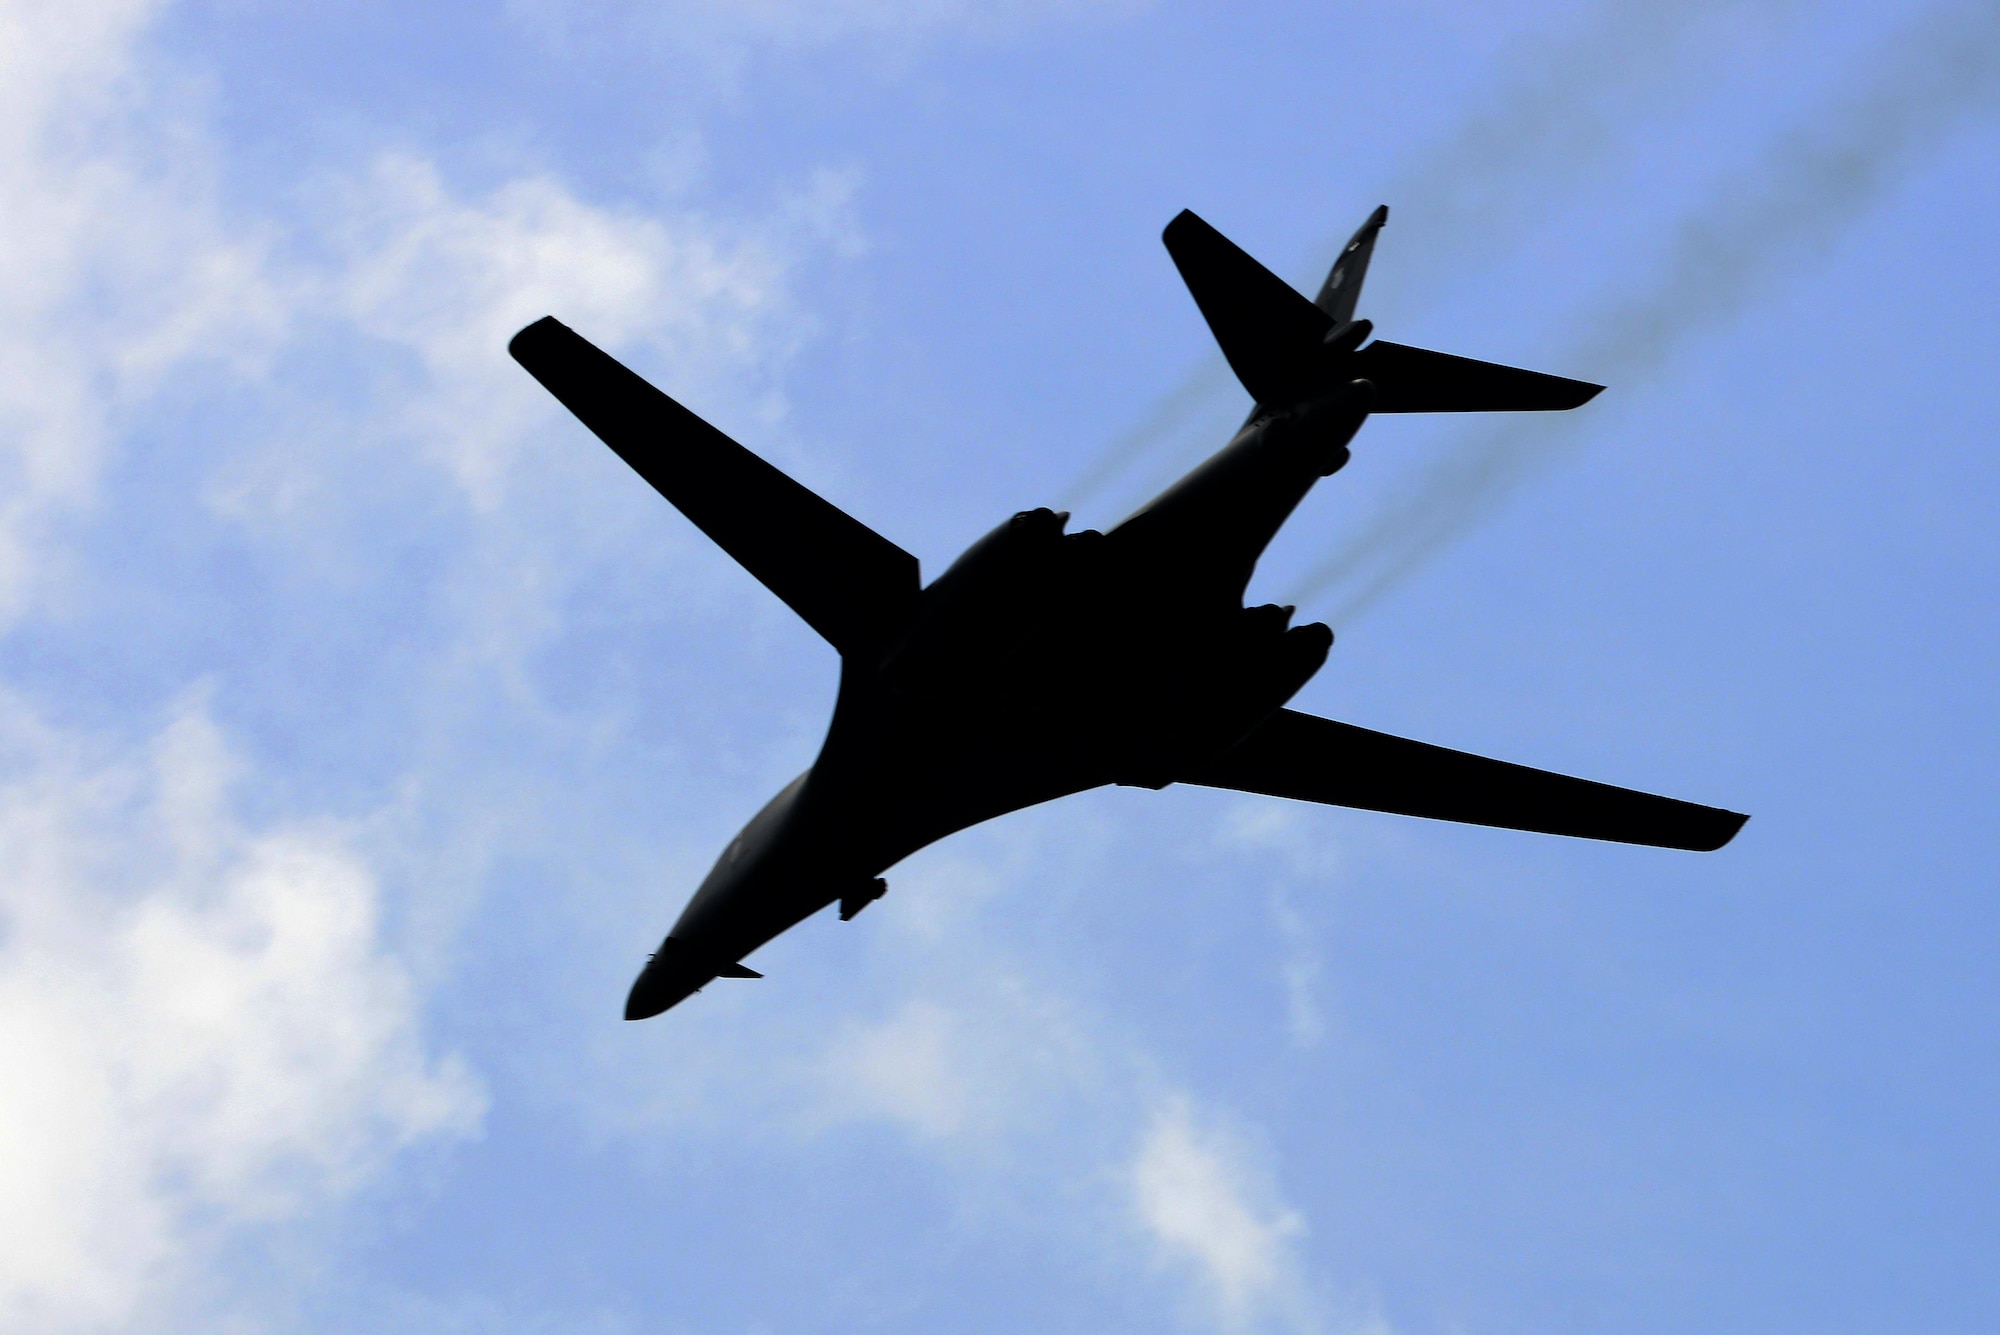 A B-1 Lancer flies over Langley Air Force Base, Va., following a 95th Anniversary Maj. Gen. William “Billy” Mitchell memorial reenactment, July 22, 2016. Pilots flying 8 different airframes dropped more than 30 inert munitions to memorialize the bombing of the Ostfriesland, an “unsinkable” captured German battleship, during the 1921 airpower trials – an accomplishment which proved aviation’s place in the U.S. military. (U.S. Air Force photo by Staff Sgt. R. Alex Durbin)